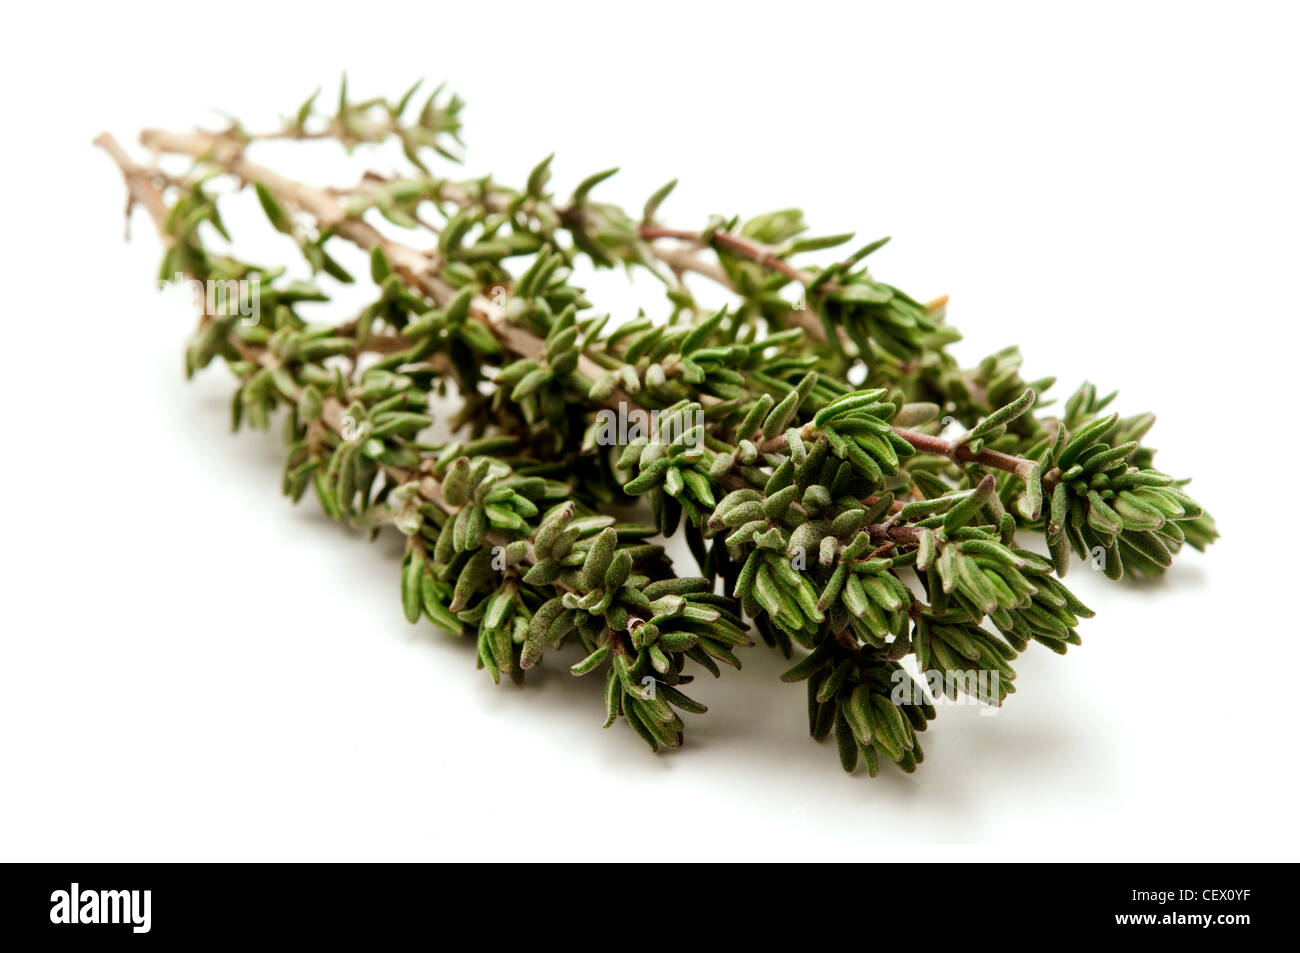 Sprig of thyme on a white background Stock Photo